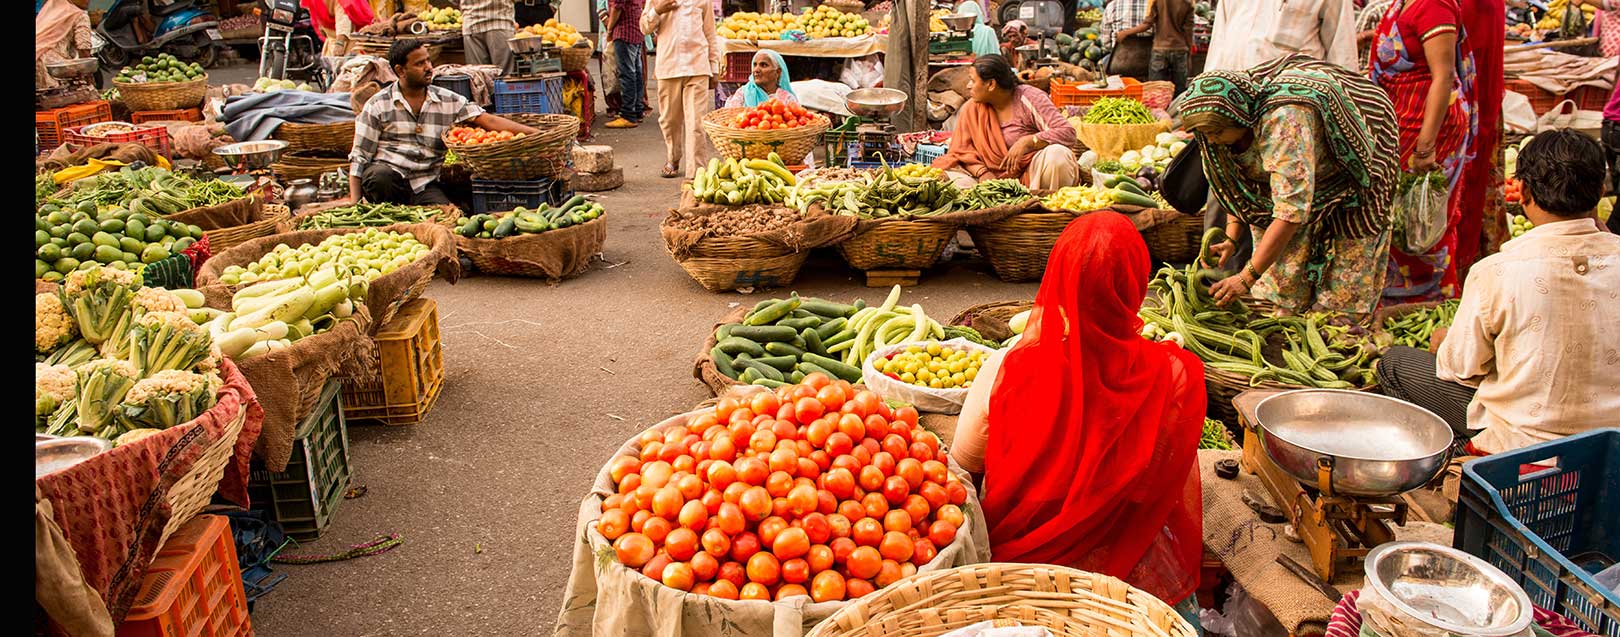 Wholesale inflation cools to 5.7% even as food prices heat up